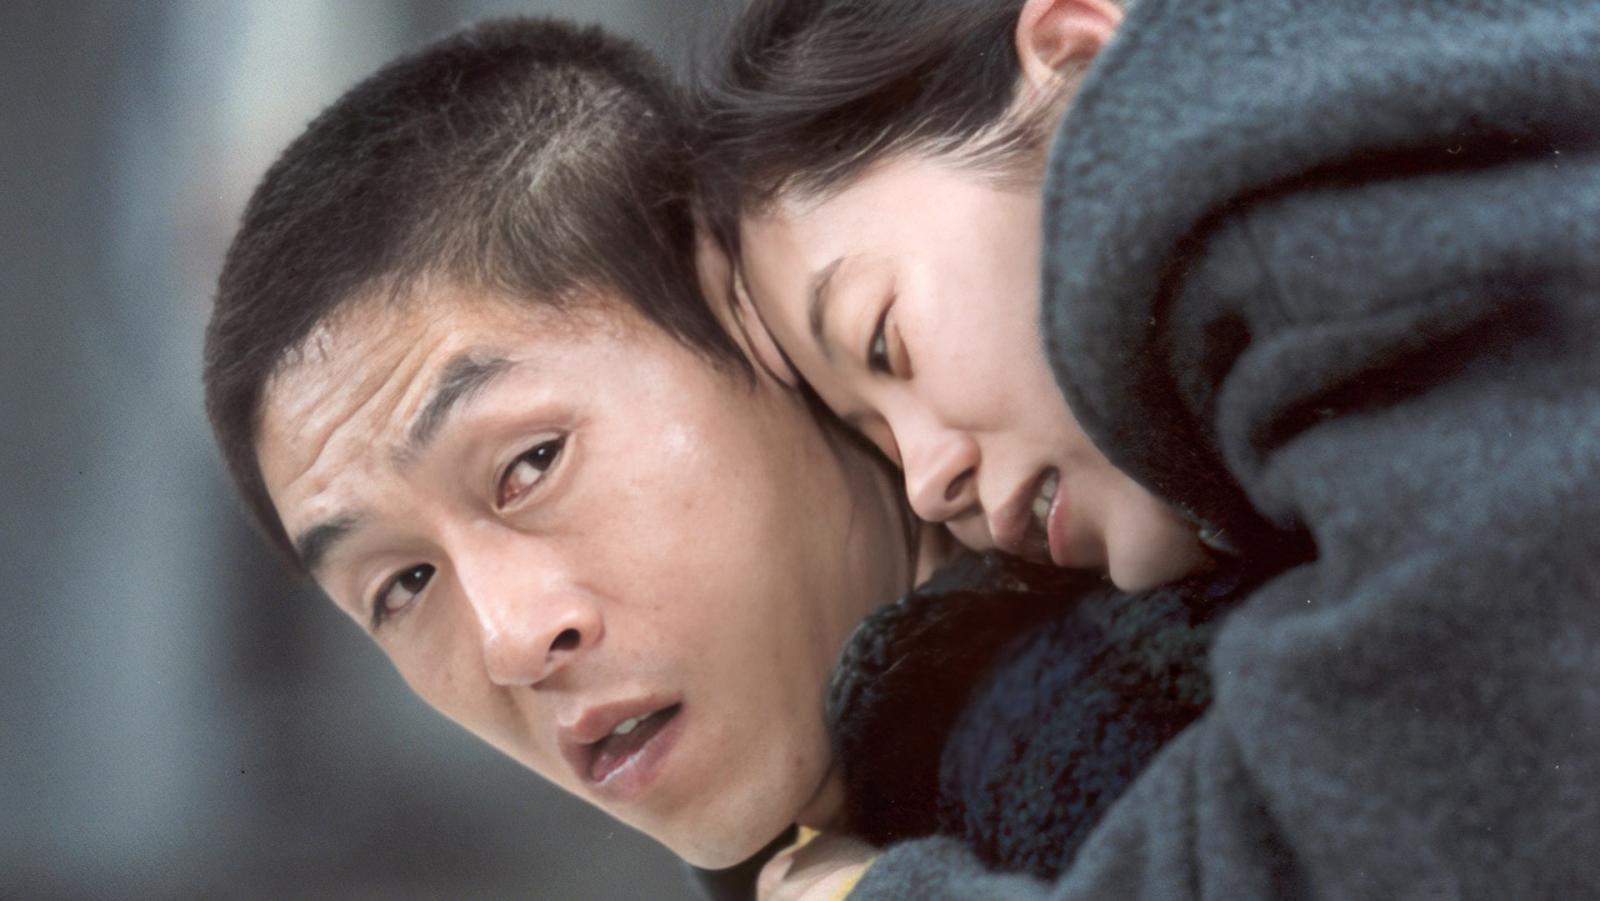 15 South Korean Movies You Probably Never Heard Of, But Should - image 14